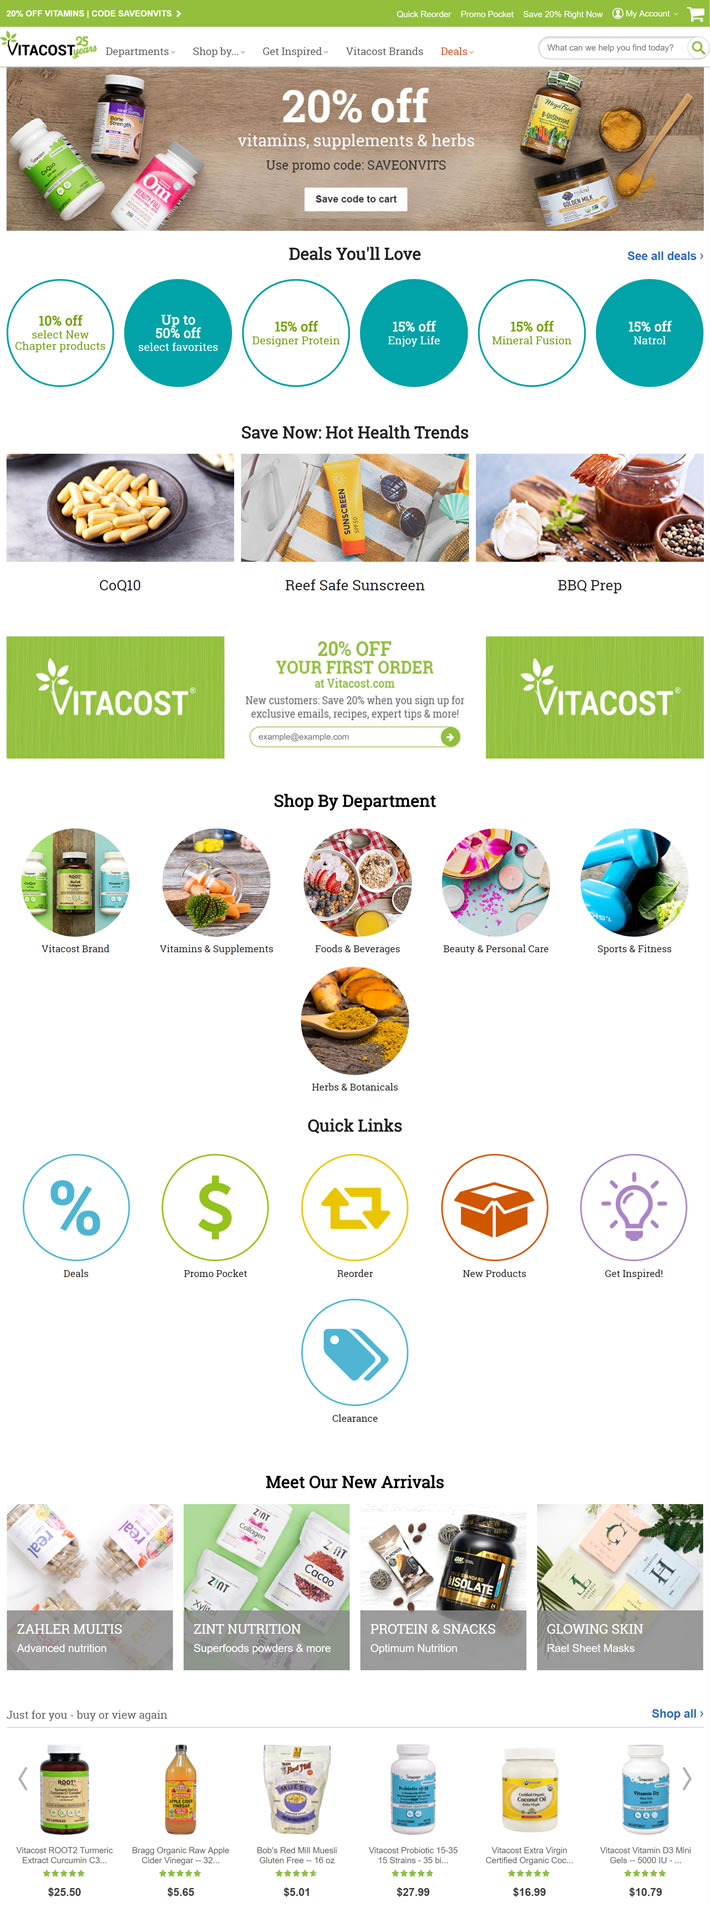 American Discount Vitamins, Supplements, Health Foods Shopping Site: Vitacost